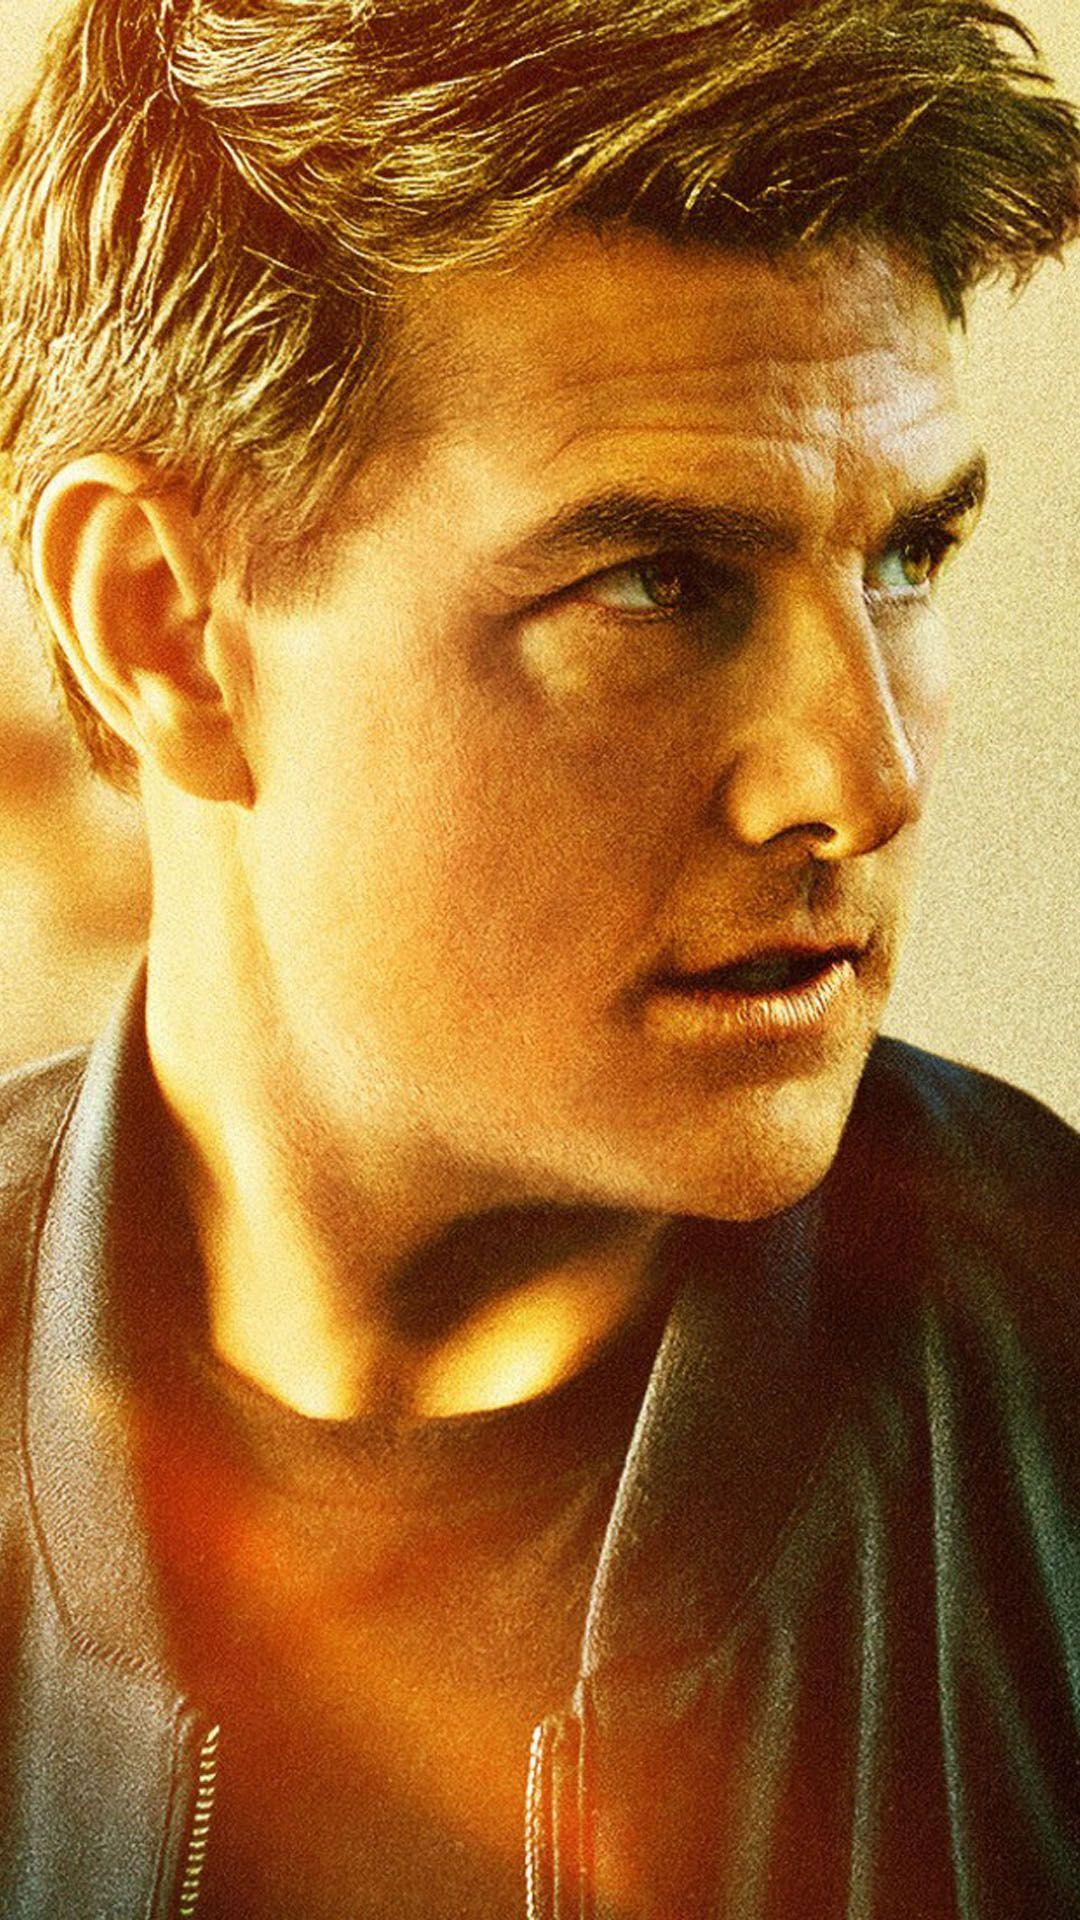 Tom Cruise As Ethan Hunt In Mission Impossible Fallout